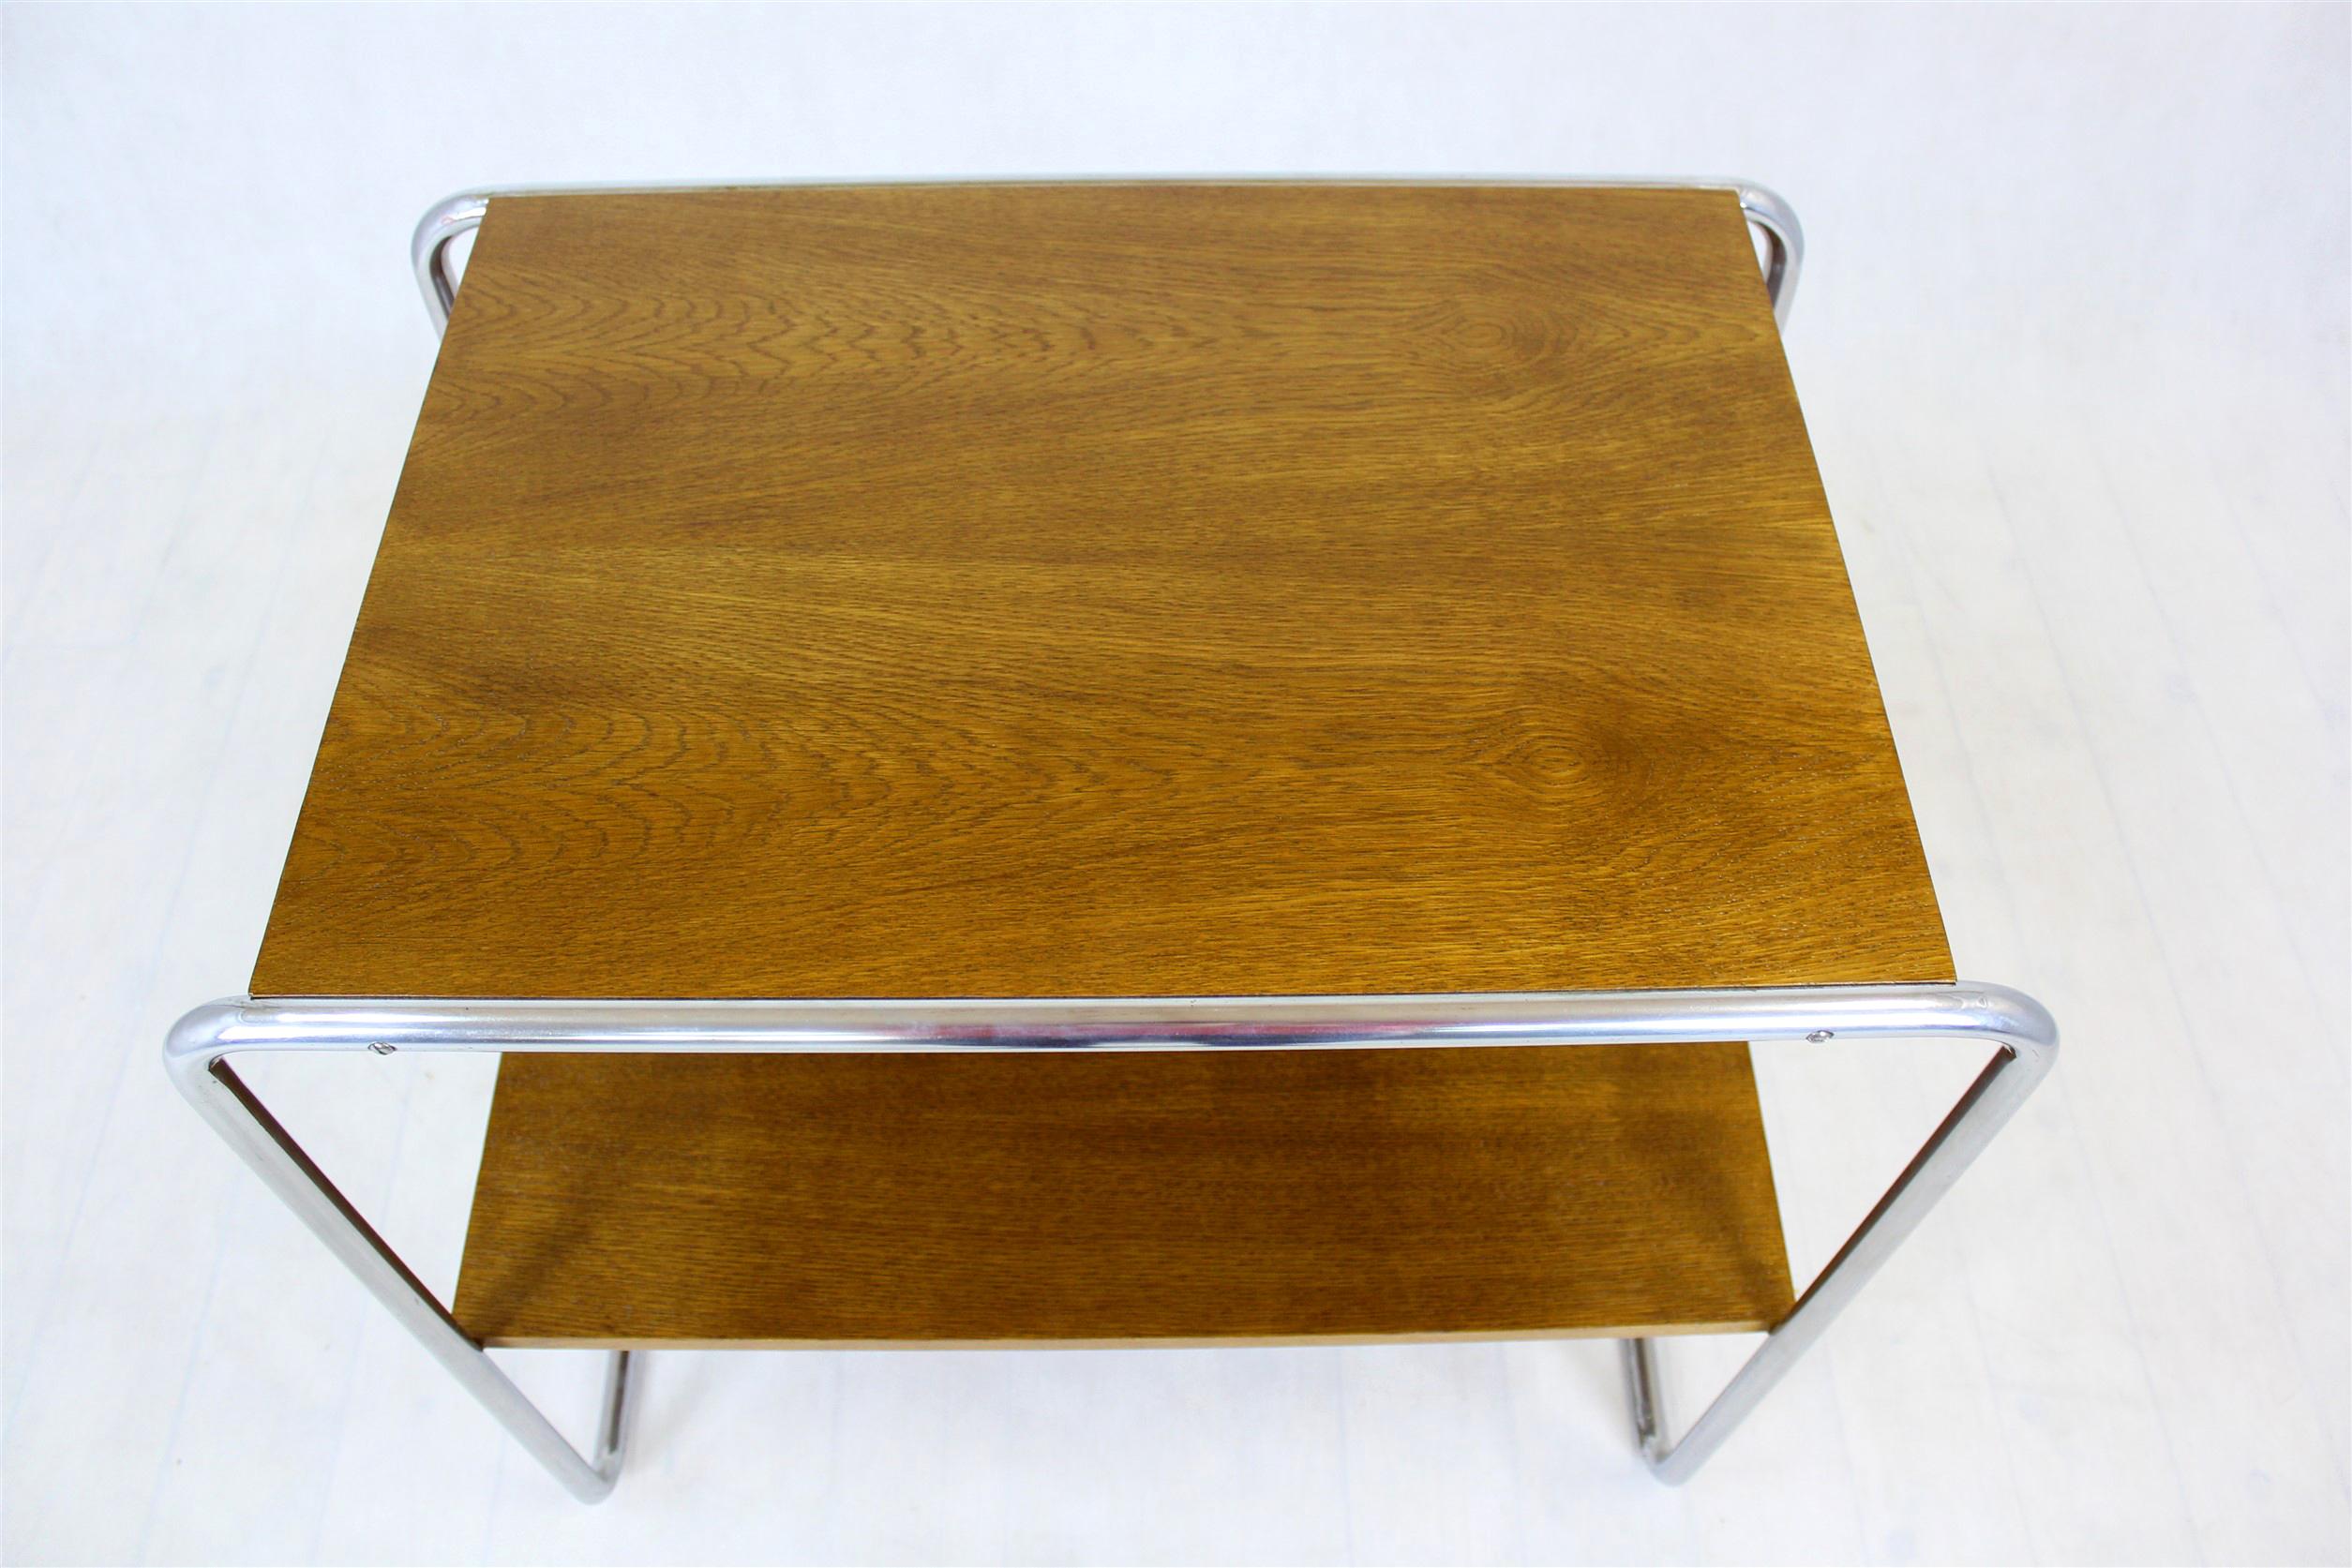 
This console table (mod. B12), was designed by Marcel Breuer in the 1930s. It features two shelfs supported by a chrome tubular steel frame. The wooden elements have been restored, varnished, the chrome is preserved in its original good condition